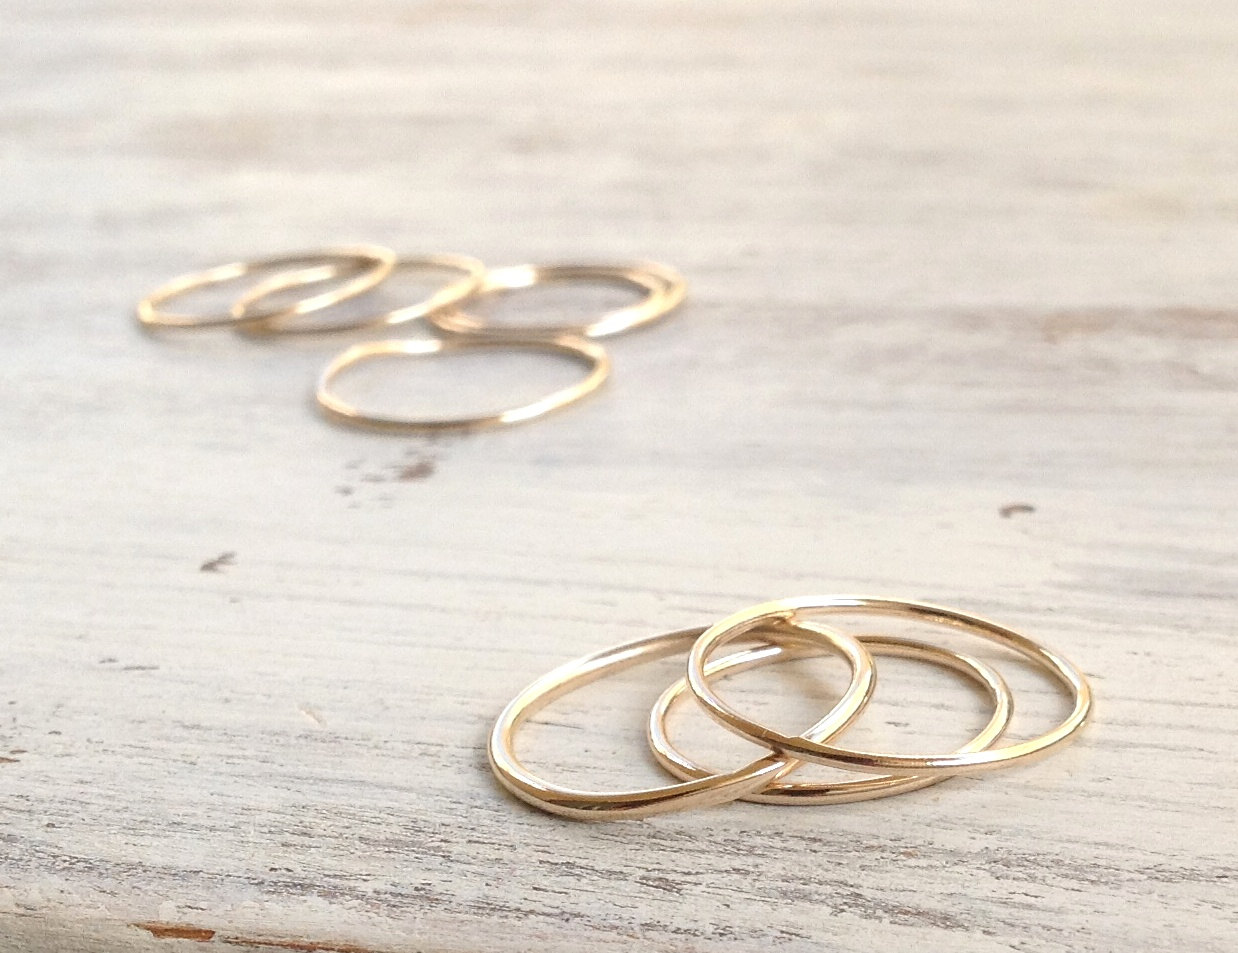 Set Of 4 Rings, Knuckle Ring, Stacking Rings, Thin Ring, Gold Knuckle Ring, Simple Ring, Smooth Ring Rb11